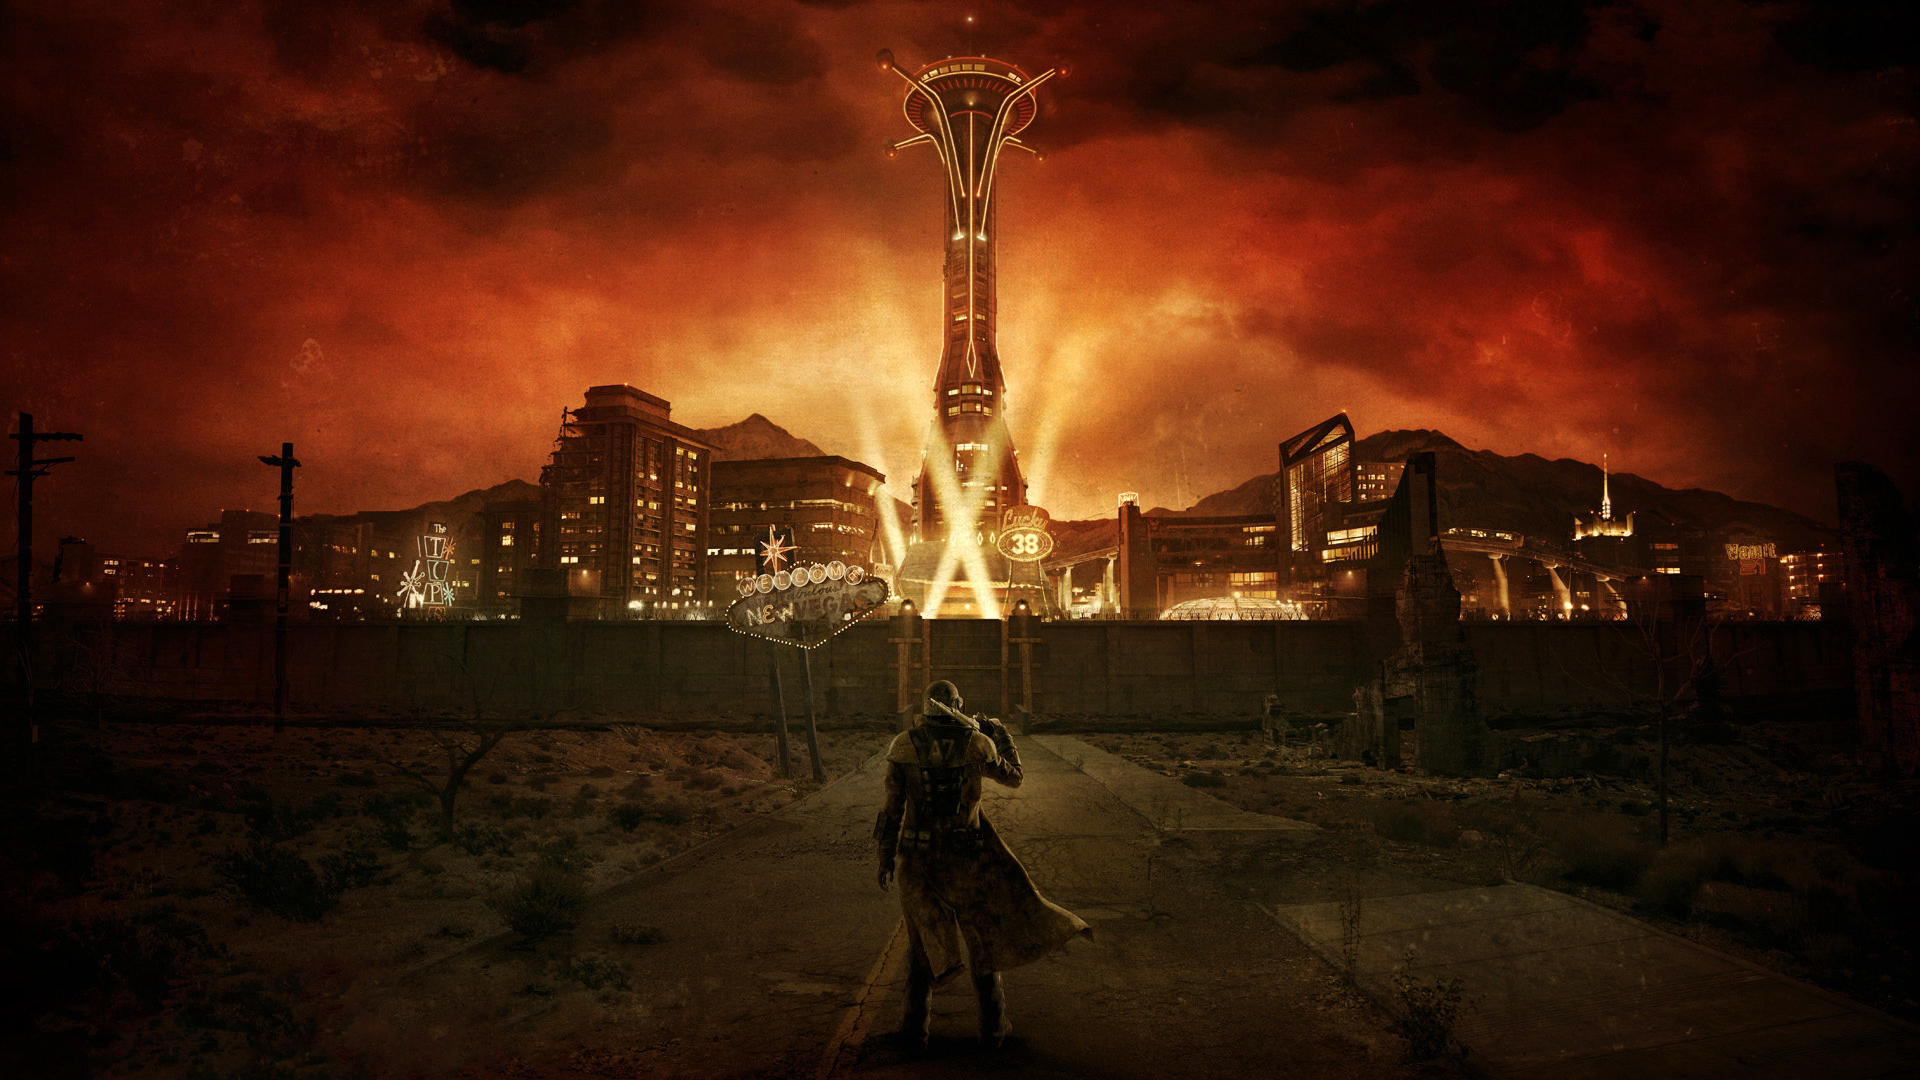 Fallout New Vegas HD Wallpaper And Background Image